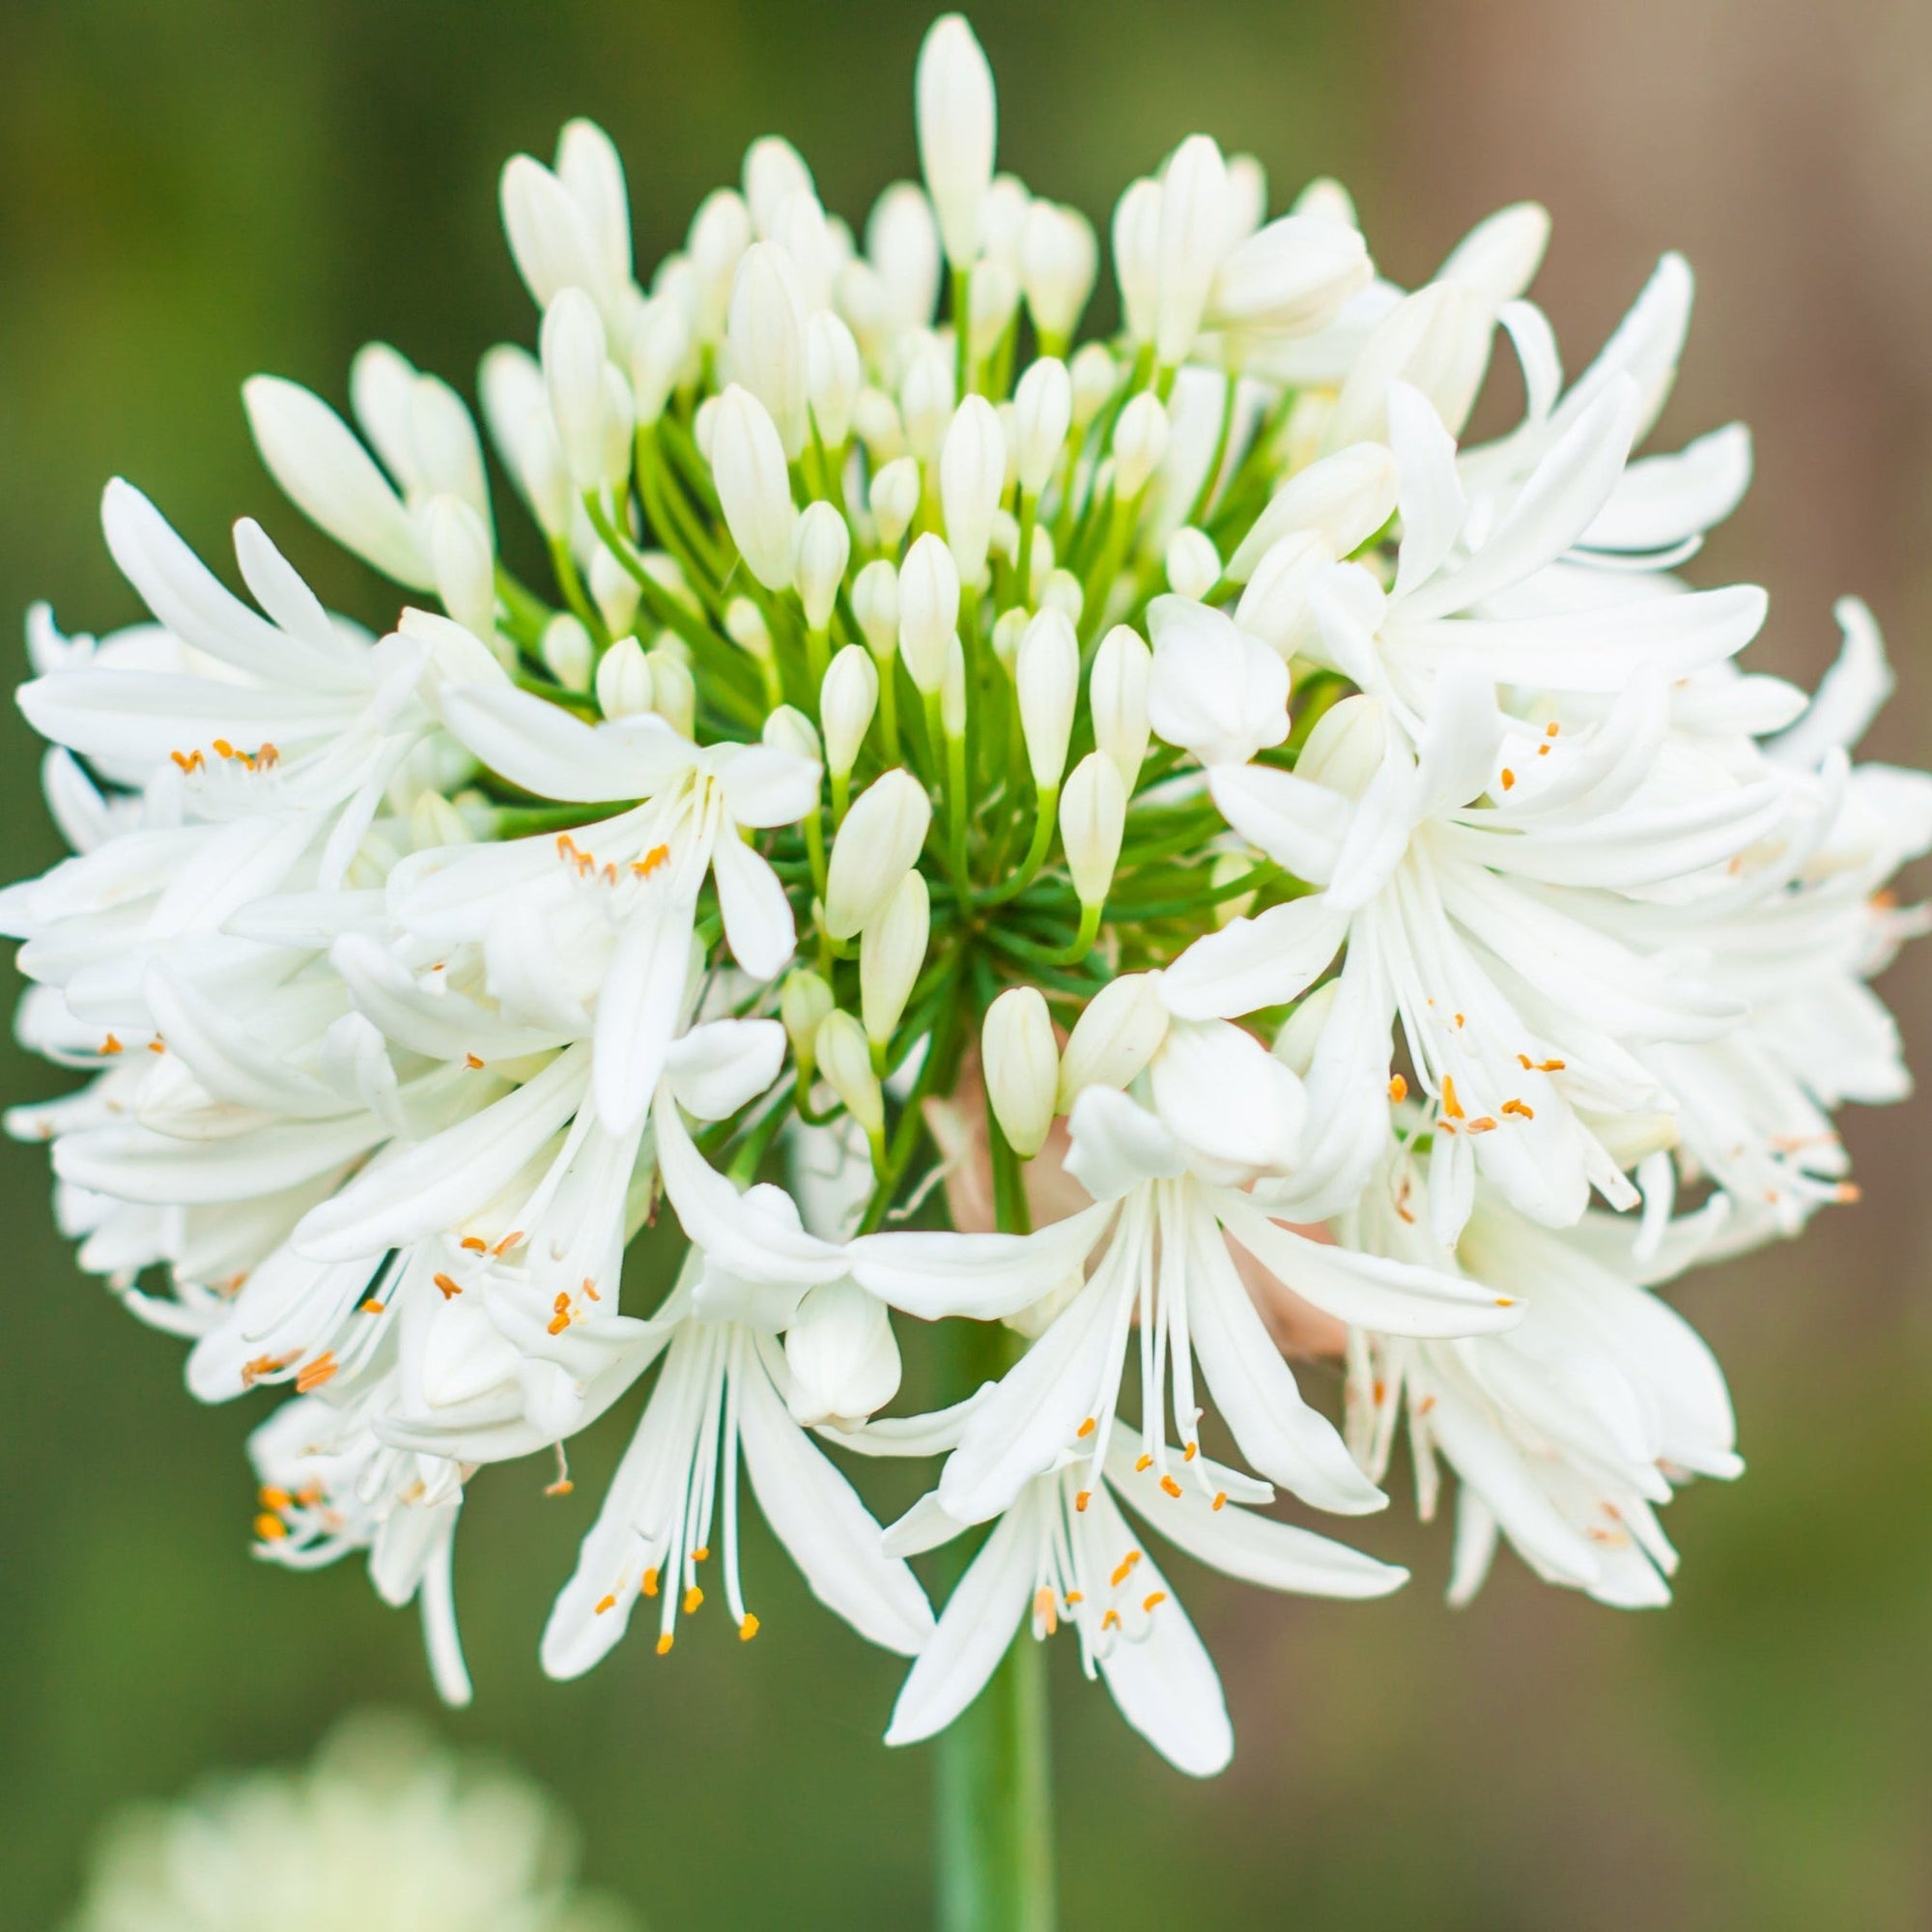 Agapanthus 'Africanus' - African Lily  (White)  1.5L